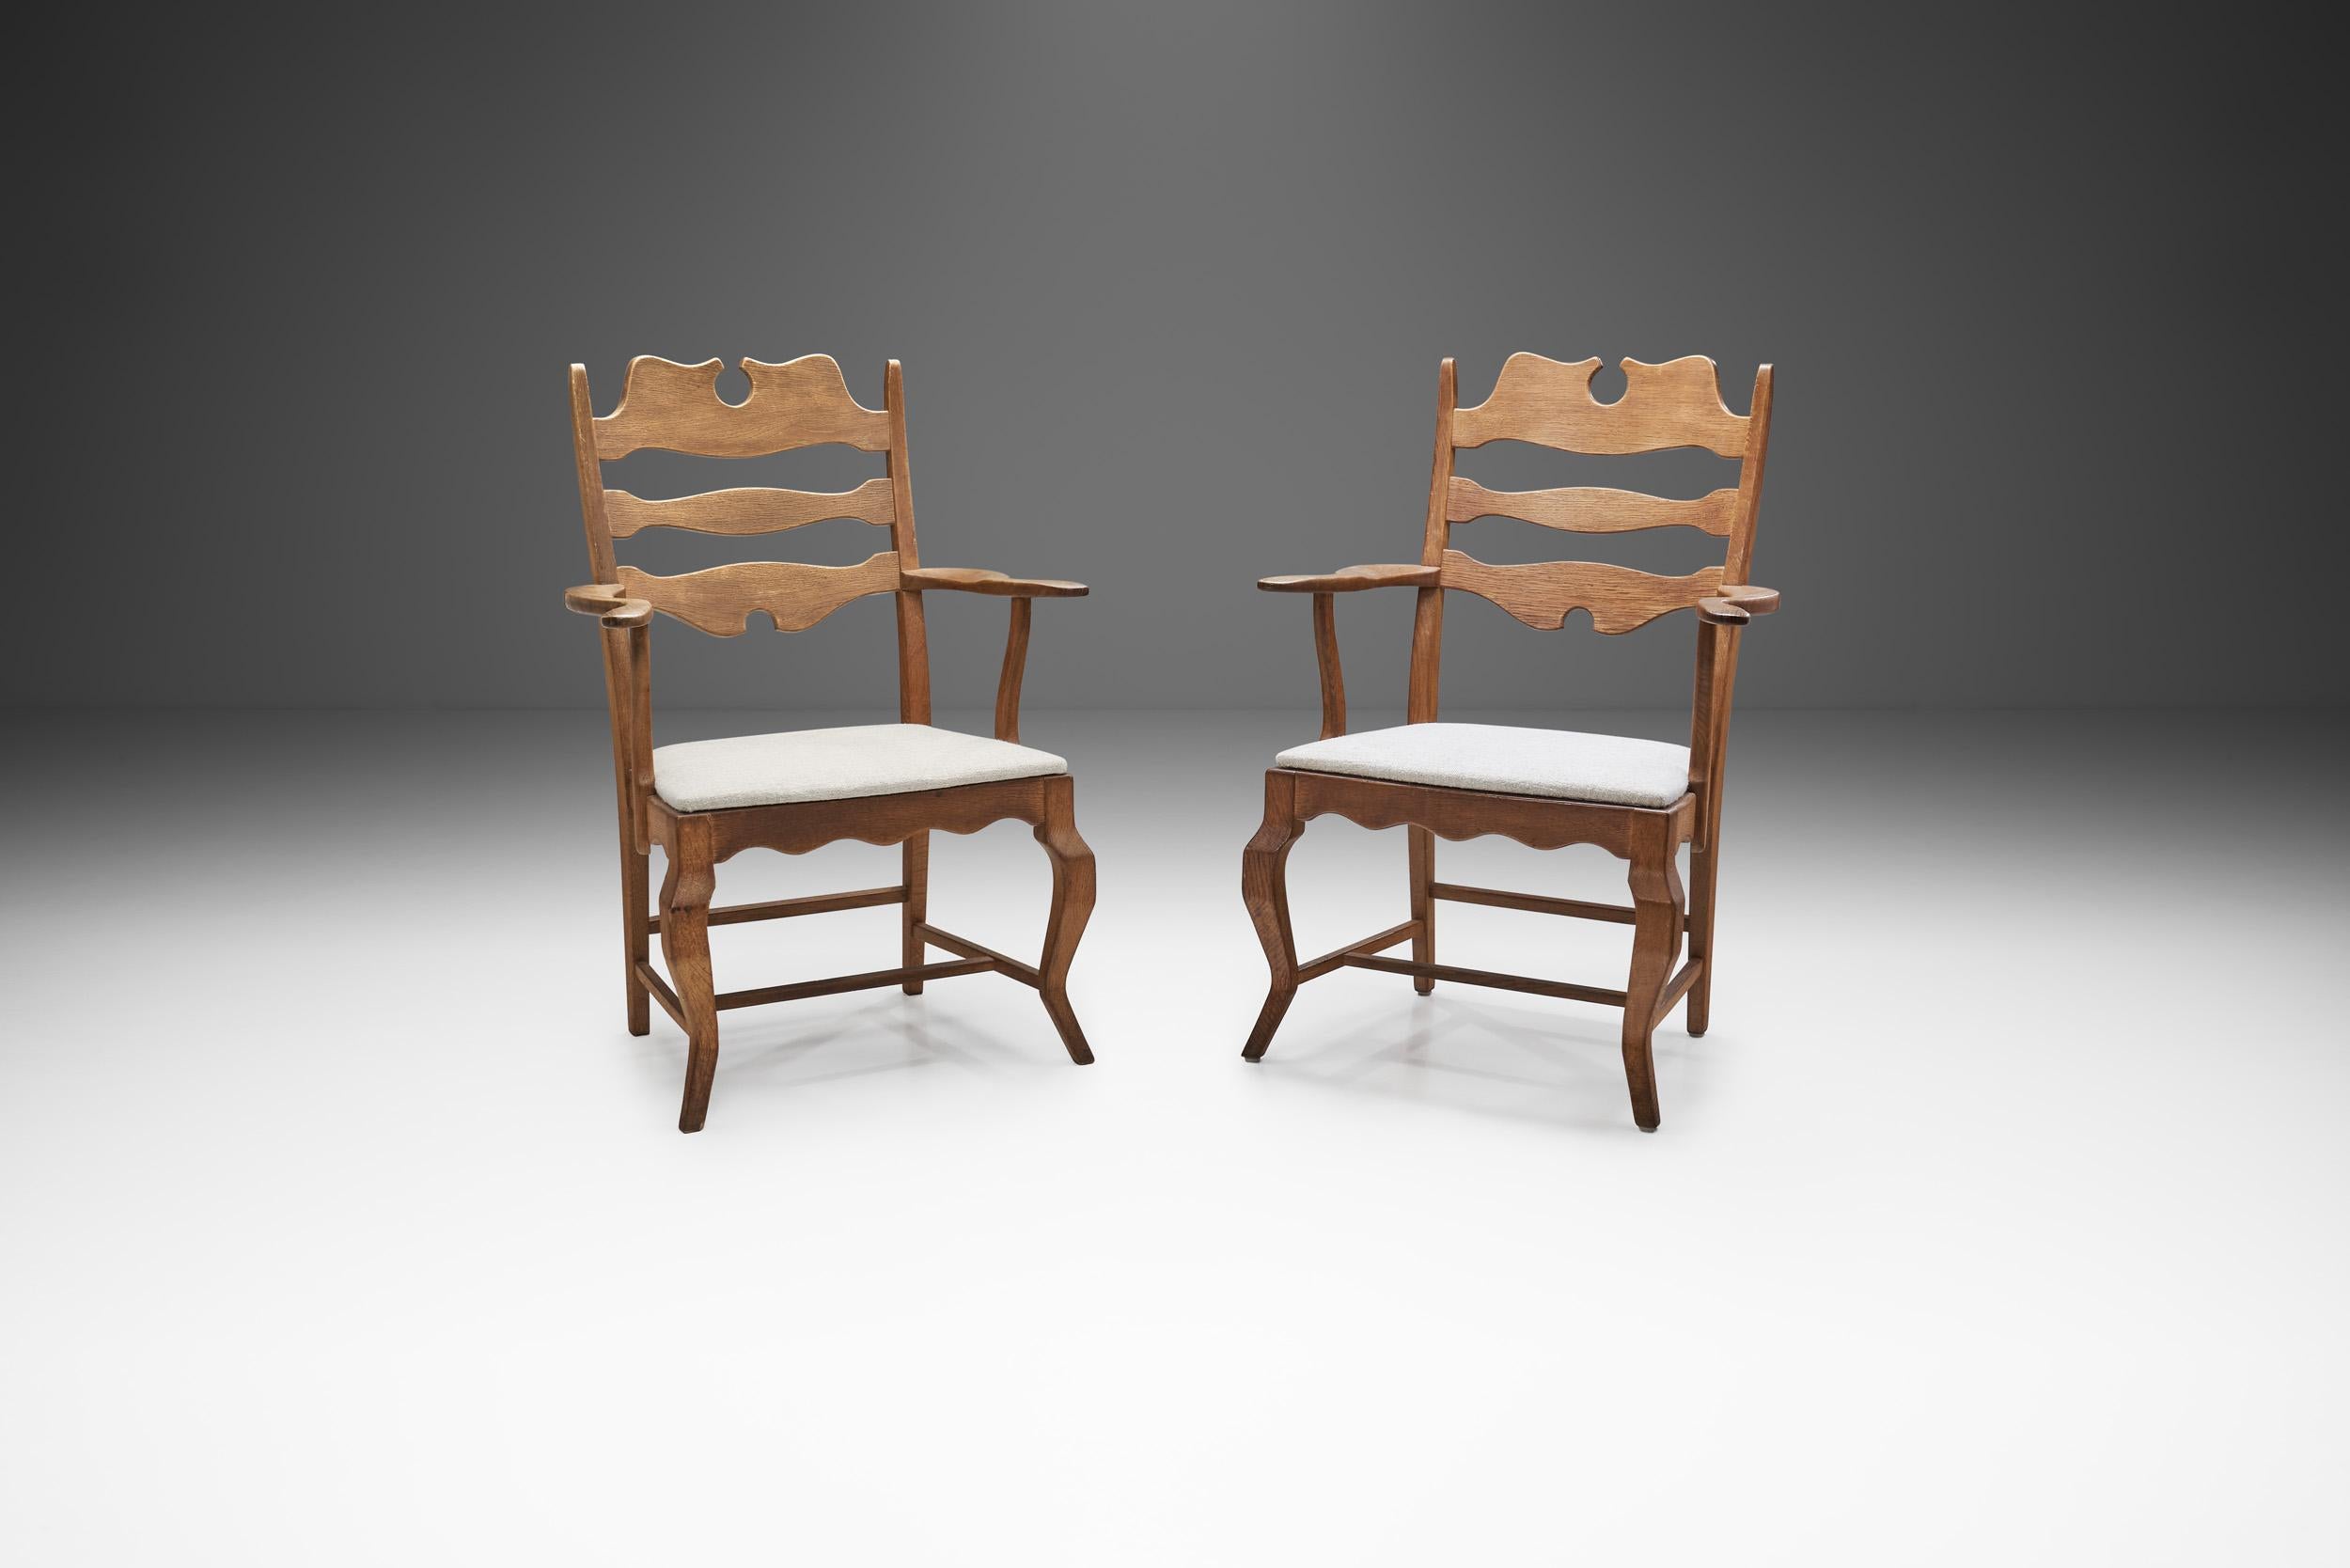 This impressive pair of mid-century dining chairs is representative of the fundamental axioms of Scandinavian design that revolve around quality and functionality and pairs it with a distinctive design.

These chairs belong to Kjærnulf’s so-called